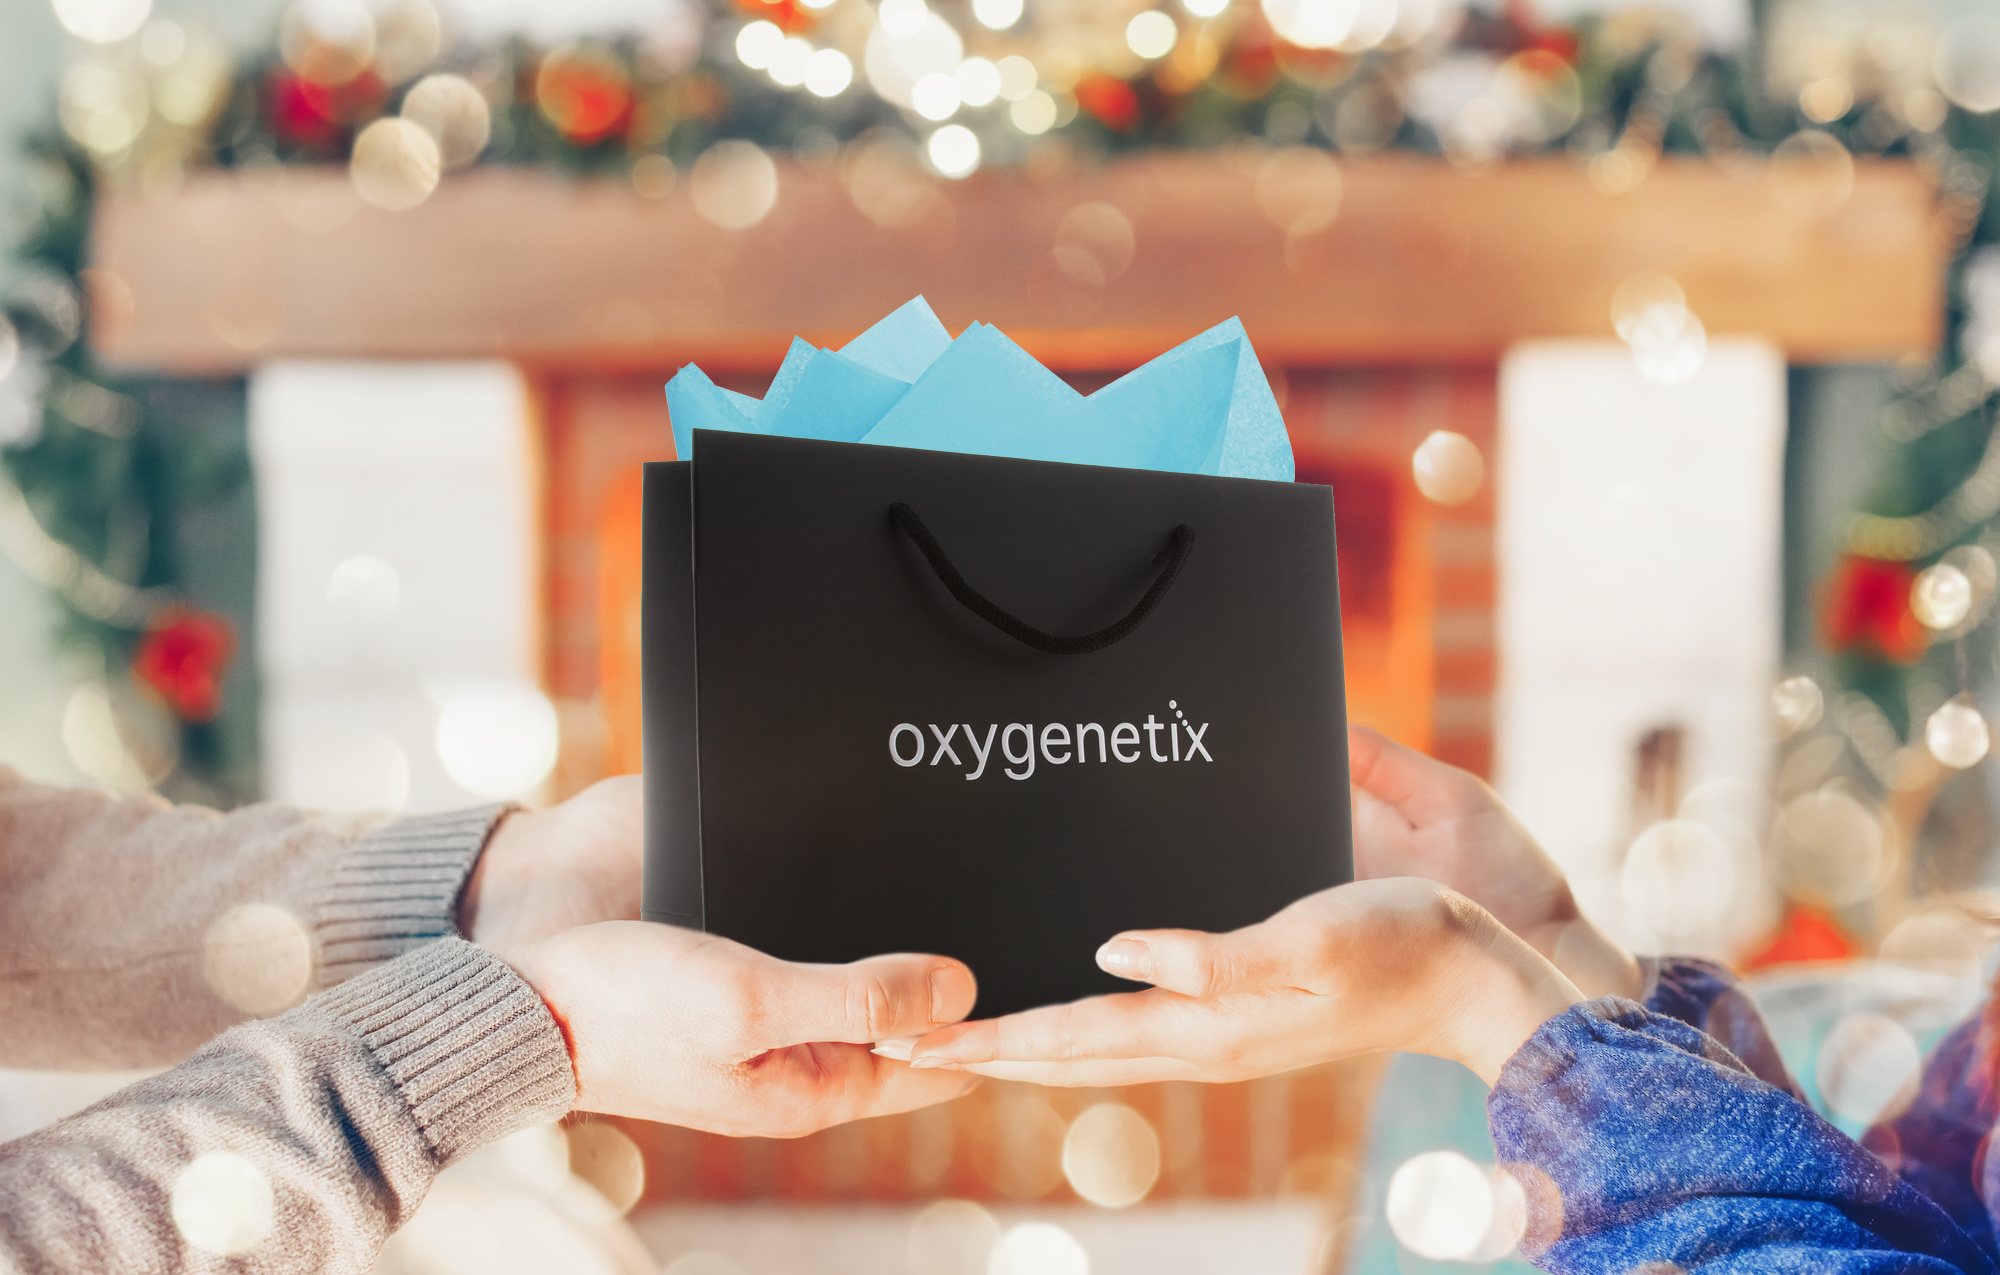 The Gift You Give with Oxygenetix